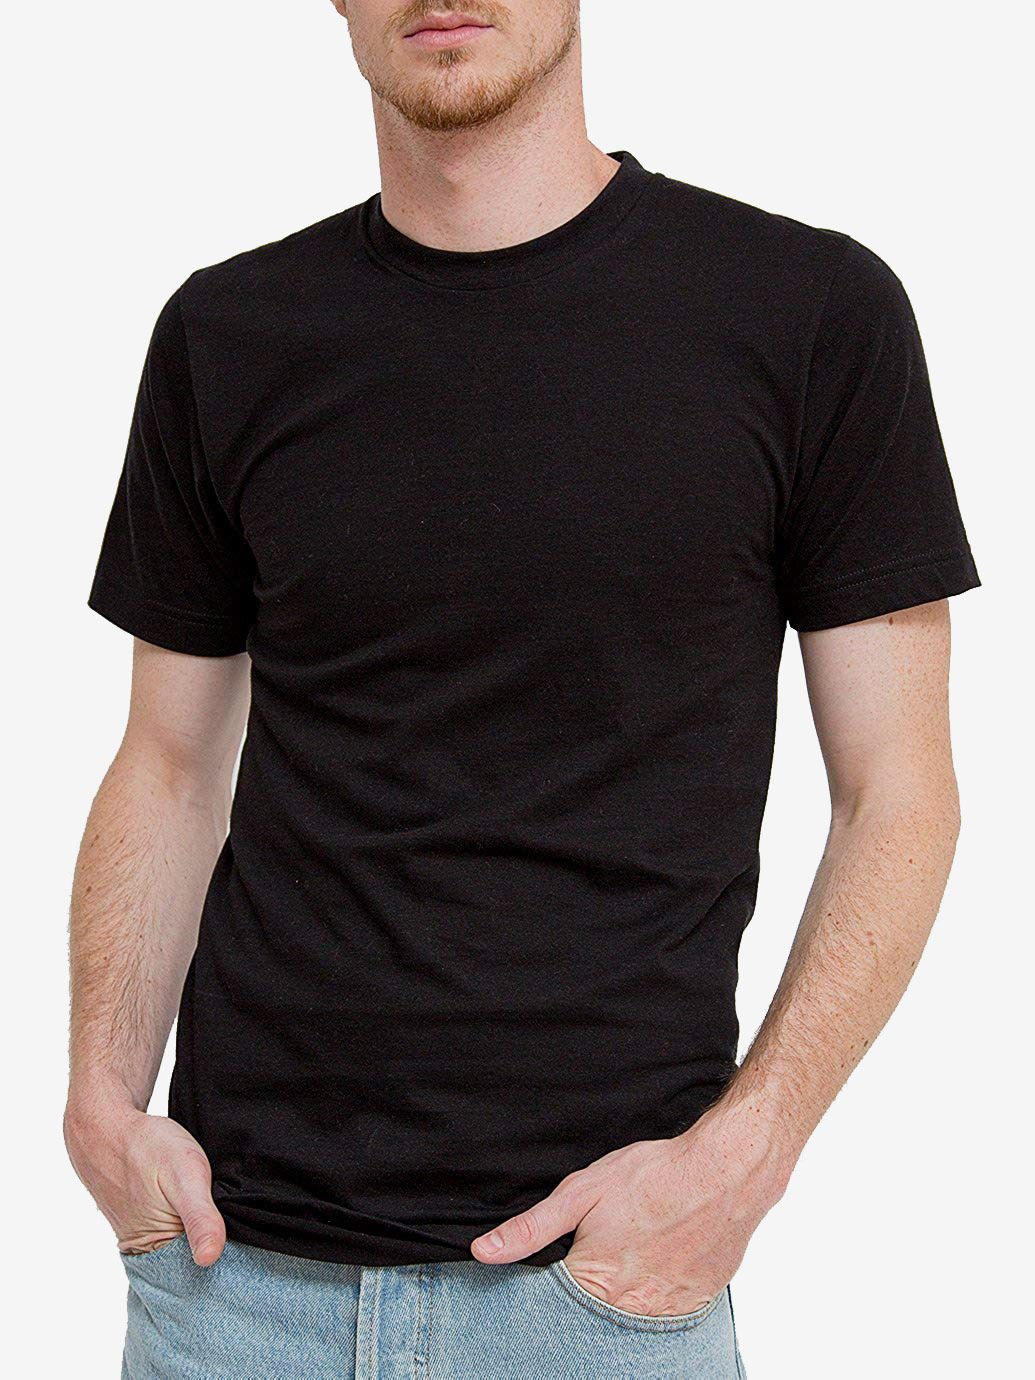 3 Pack Men T-Shirt Adult Classic Cool with Pocket Slim Fit Running Casualwear